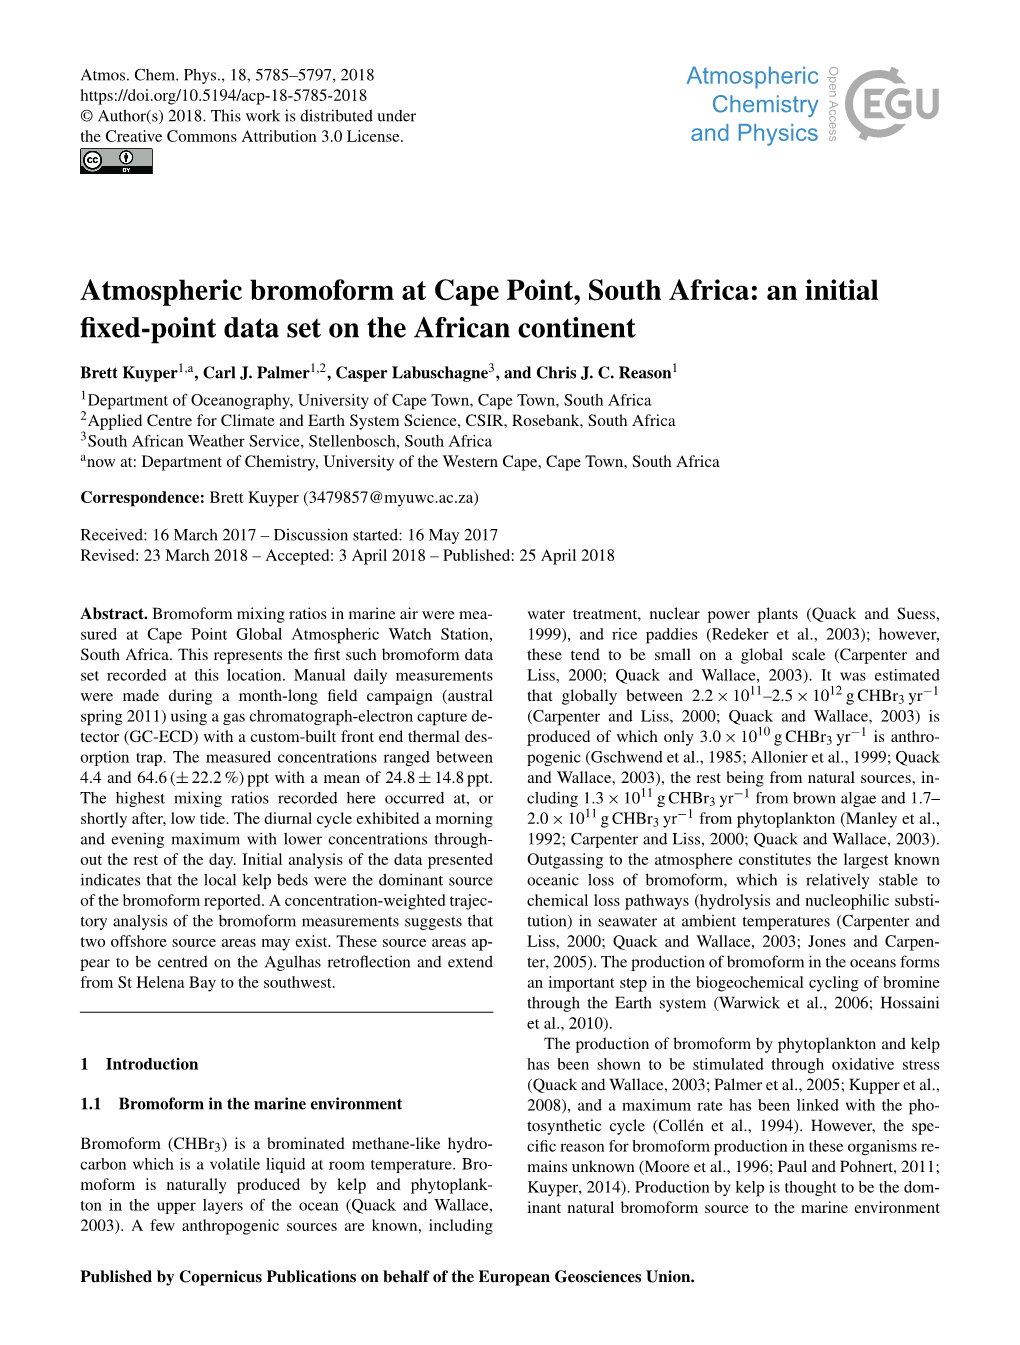 Atmospheric Bromoform at Cape Point, South Africa: an Initial ﬁxed-Point Data Set on the African Continent